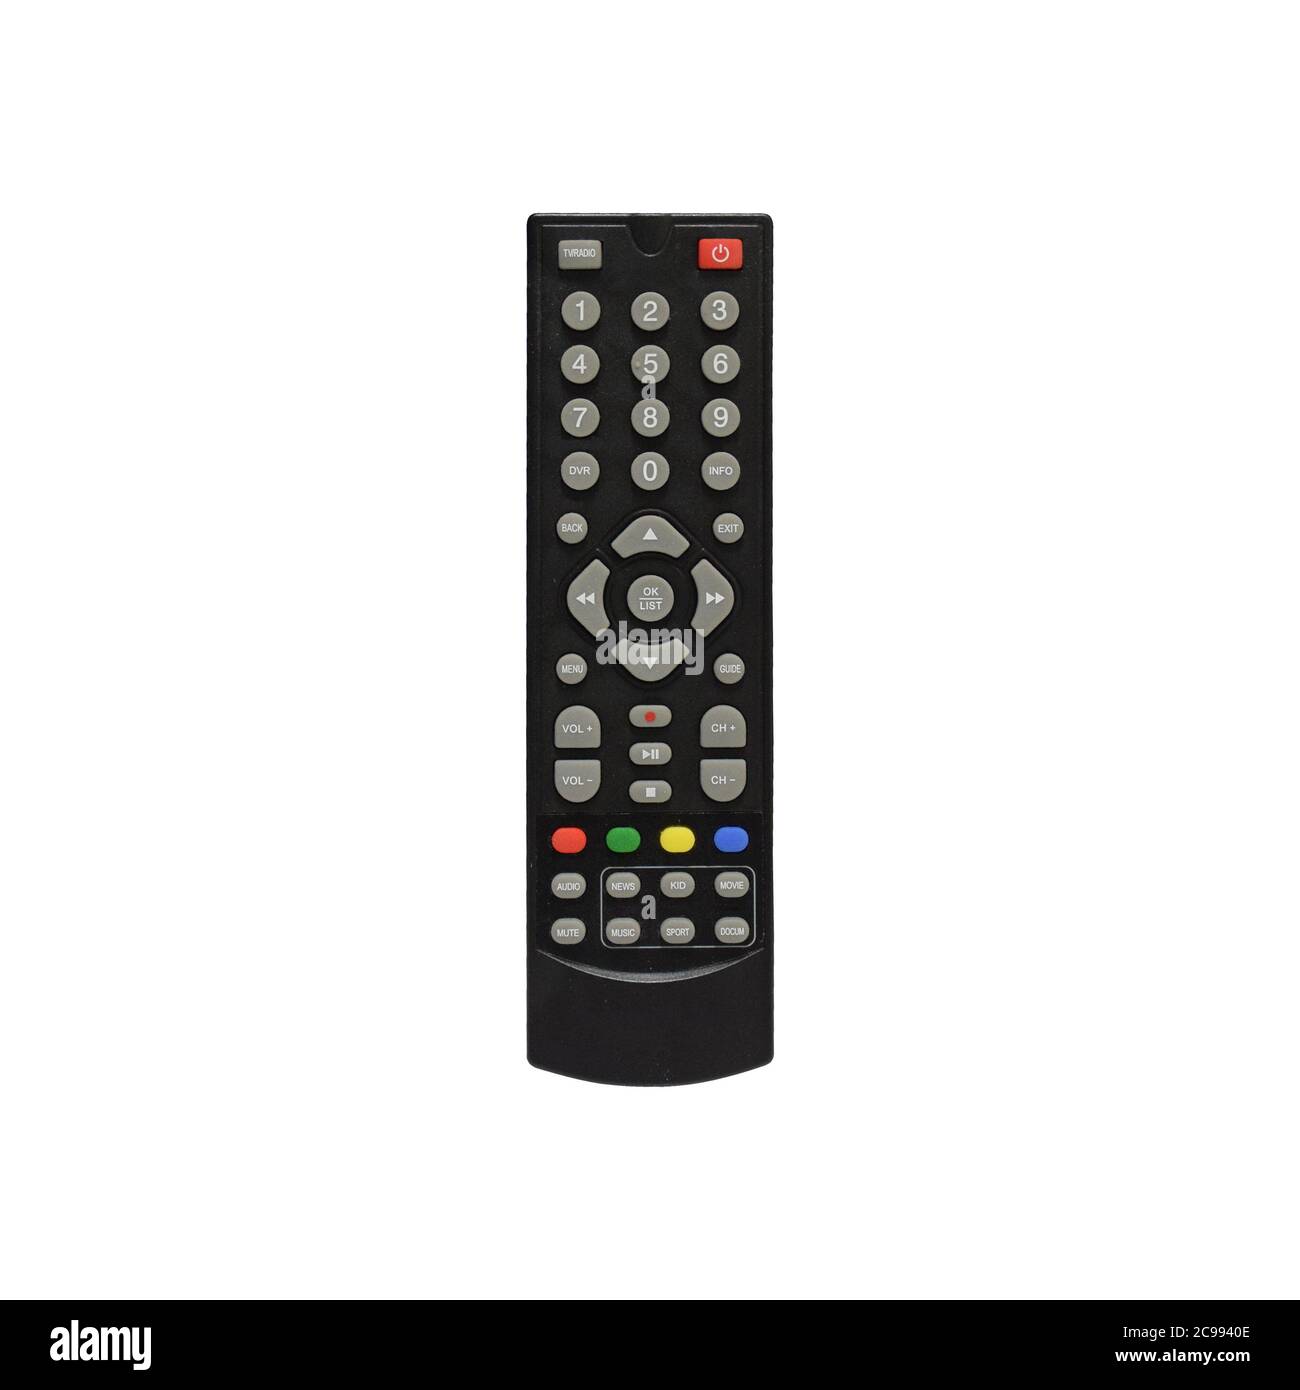 IPTV remote control isolated on white background with clipping path. Stock Photo